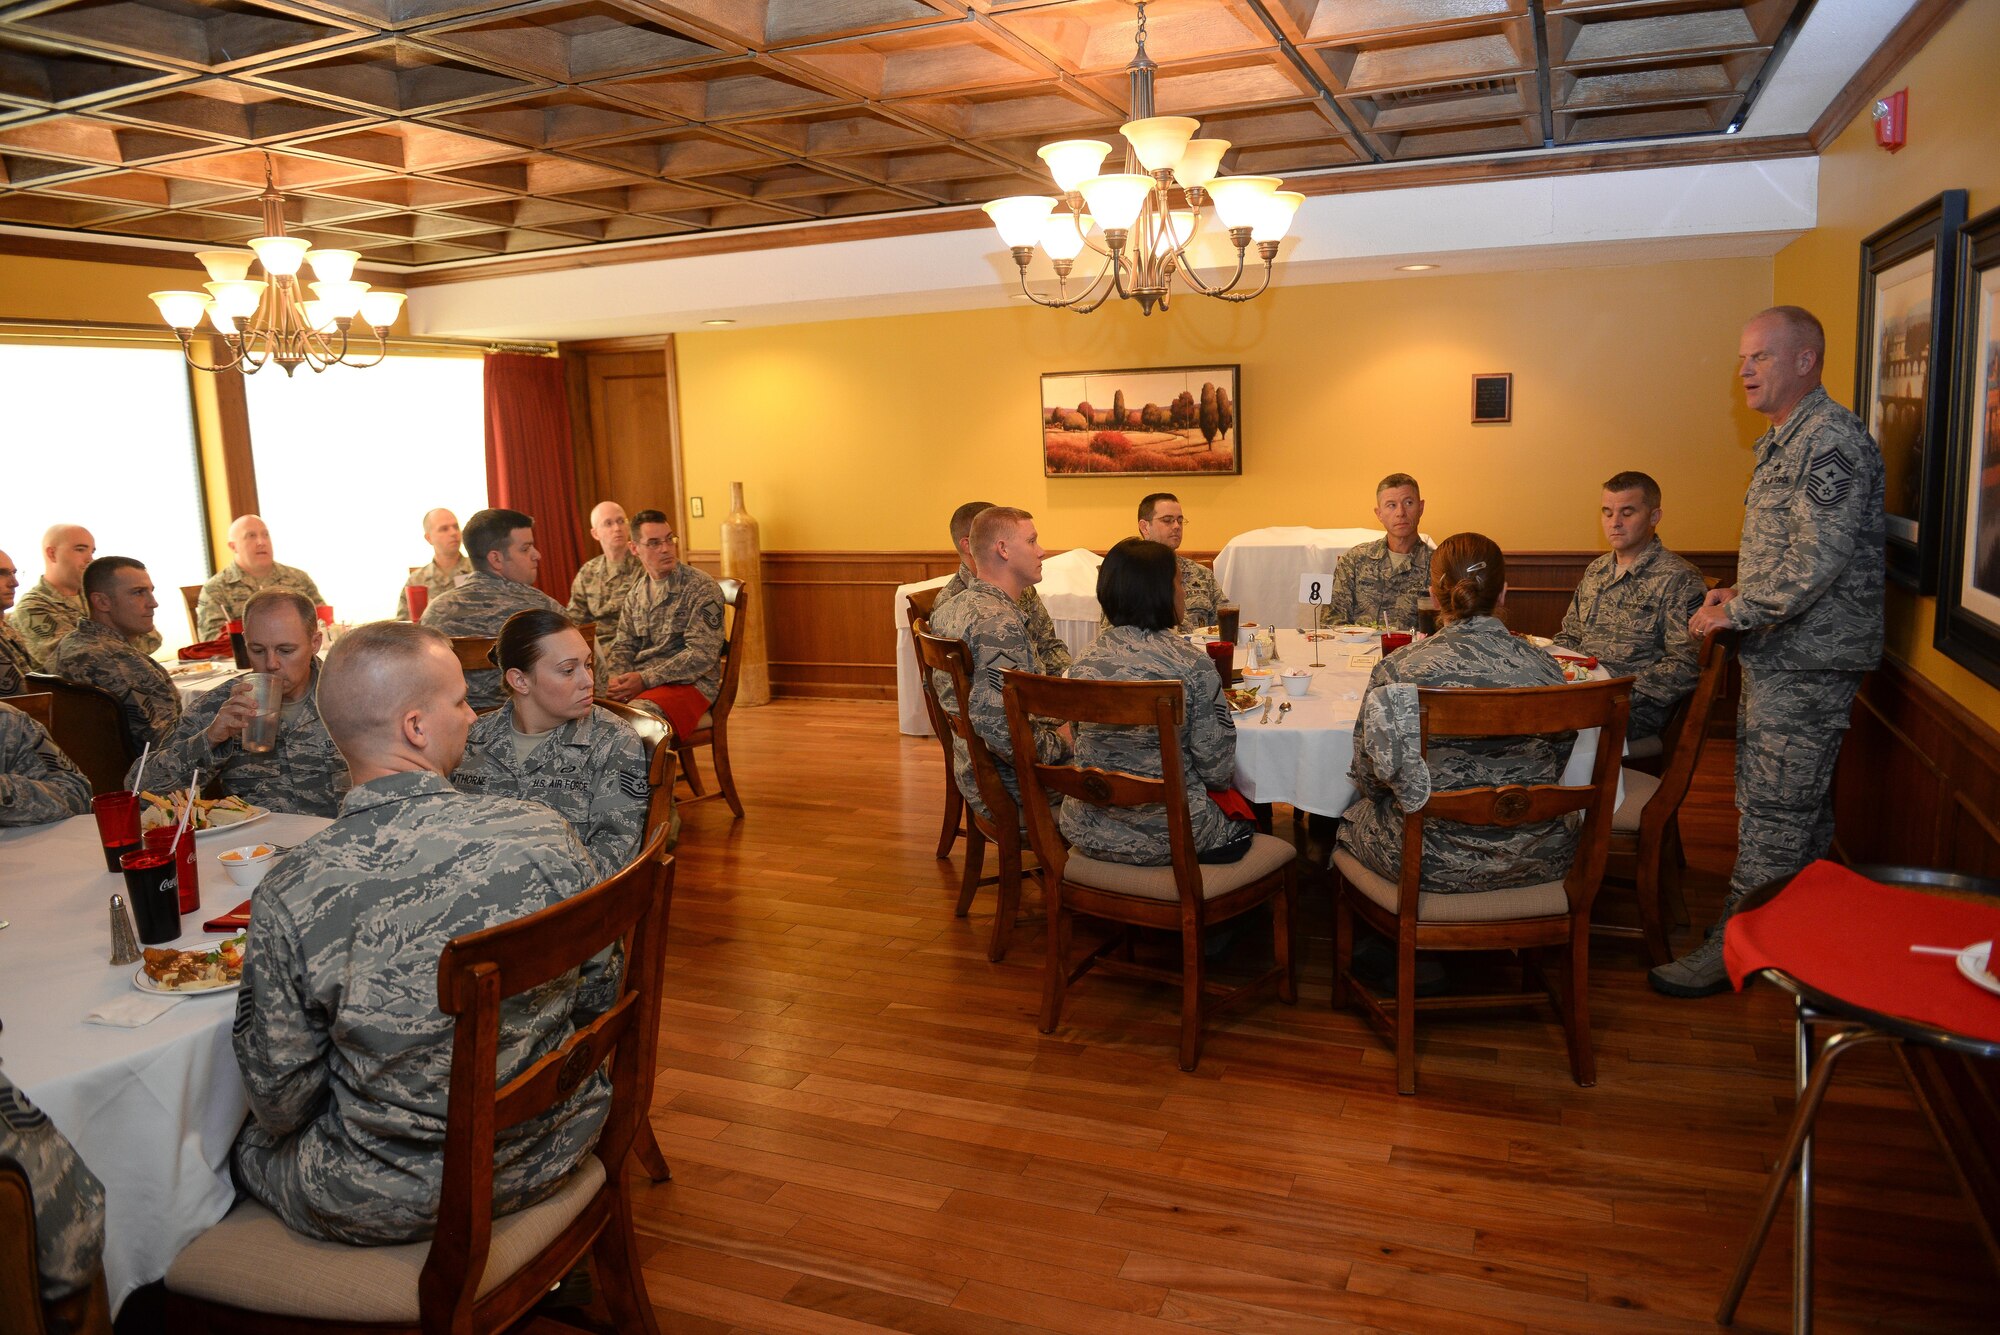 Command Chief Master Sgt. Frank Batten III, Air Combat Command's command chief, speaks with senior enlisted leaders at the Patriot Club at Offutt Air Force Base, Oct. 4, 2017. Batten came to Offutt to see and experience all the base had to offer, and to meet the Airmen that drive the mission.